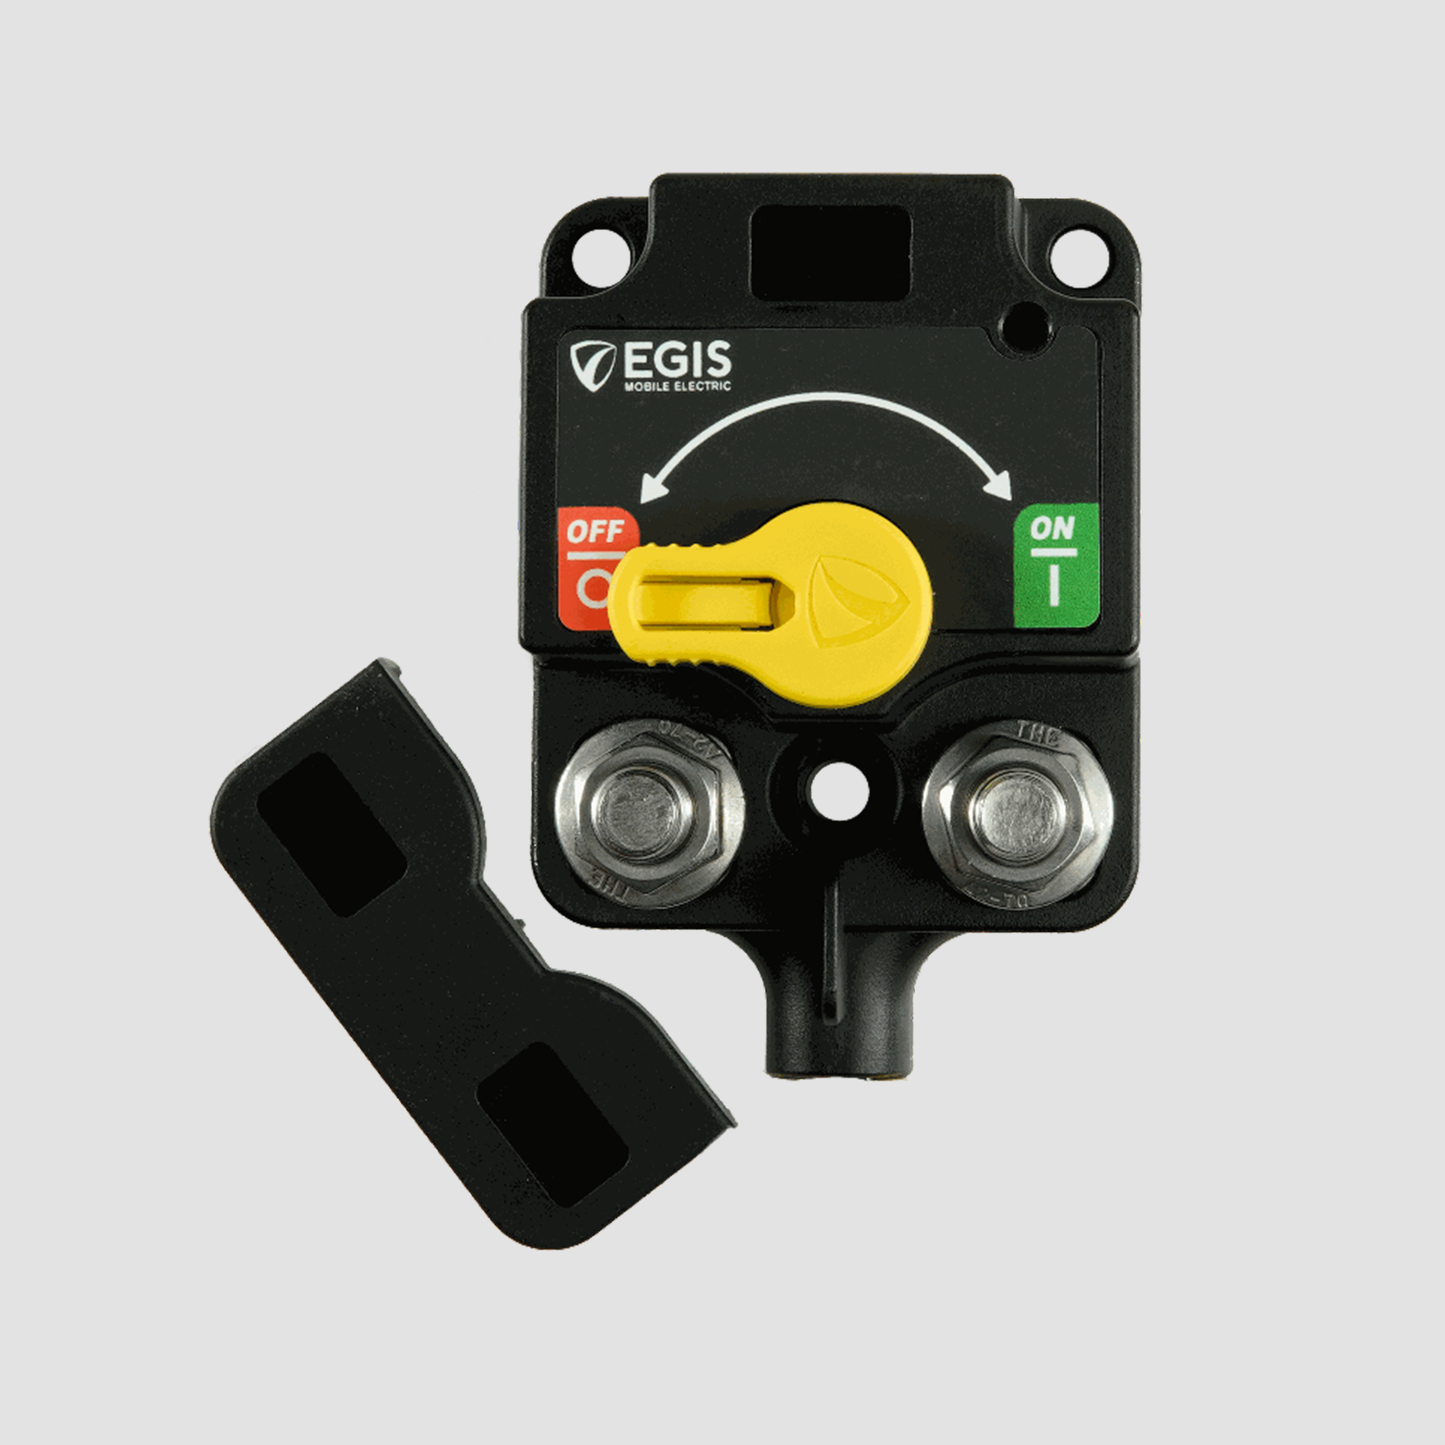 EGIS MOBILE ELECTRIC XD 500 A Heavy Duty Battery Switch/Mechanical Contactor